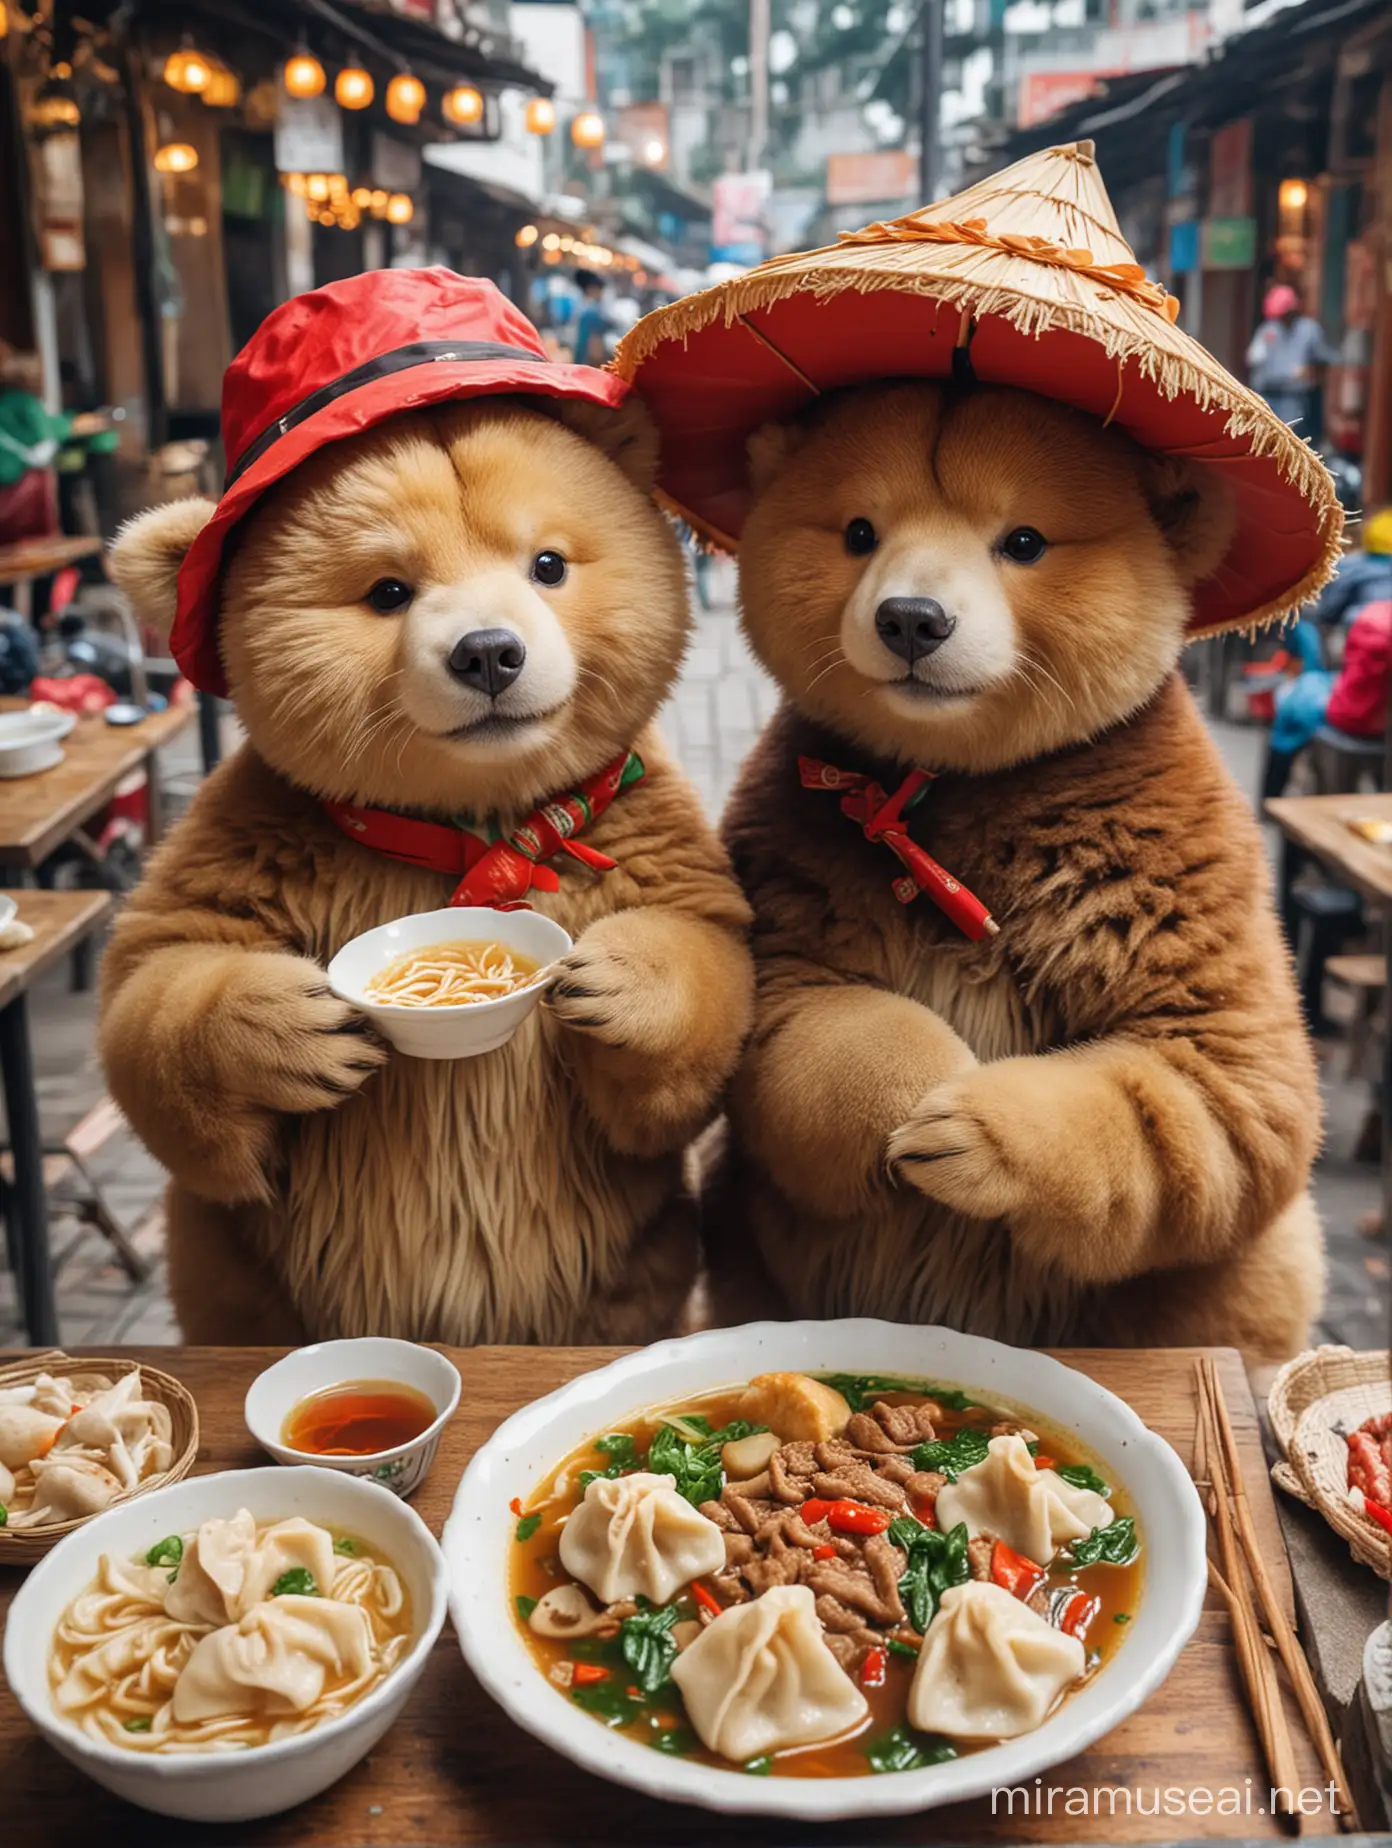 Bear and cat hugging and eating dumplings and pho soup in vietnamese street food stall. They are wearing traditional chinese hats.